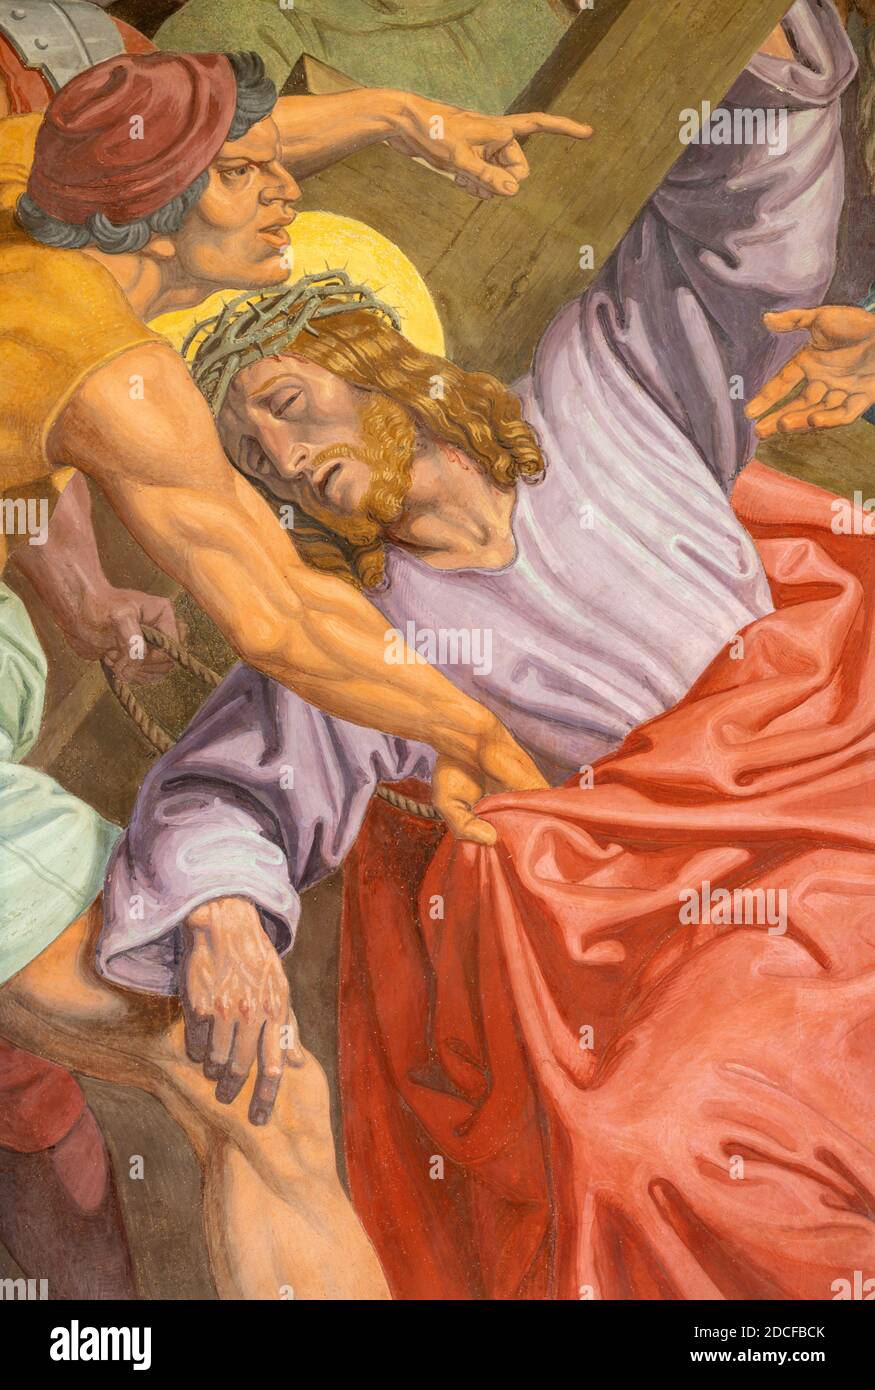 VIENNA, AUSTIRA - OCTOBER 22, 2020: The detail of fresco Fall of Jesus undwer the cross  as part of Cross way station in the church. Stock Photo